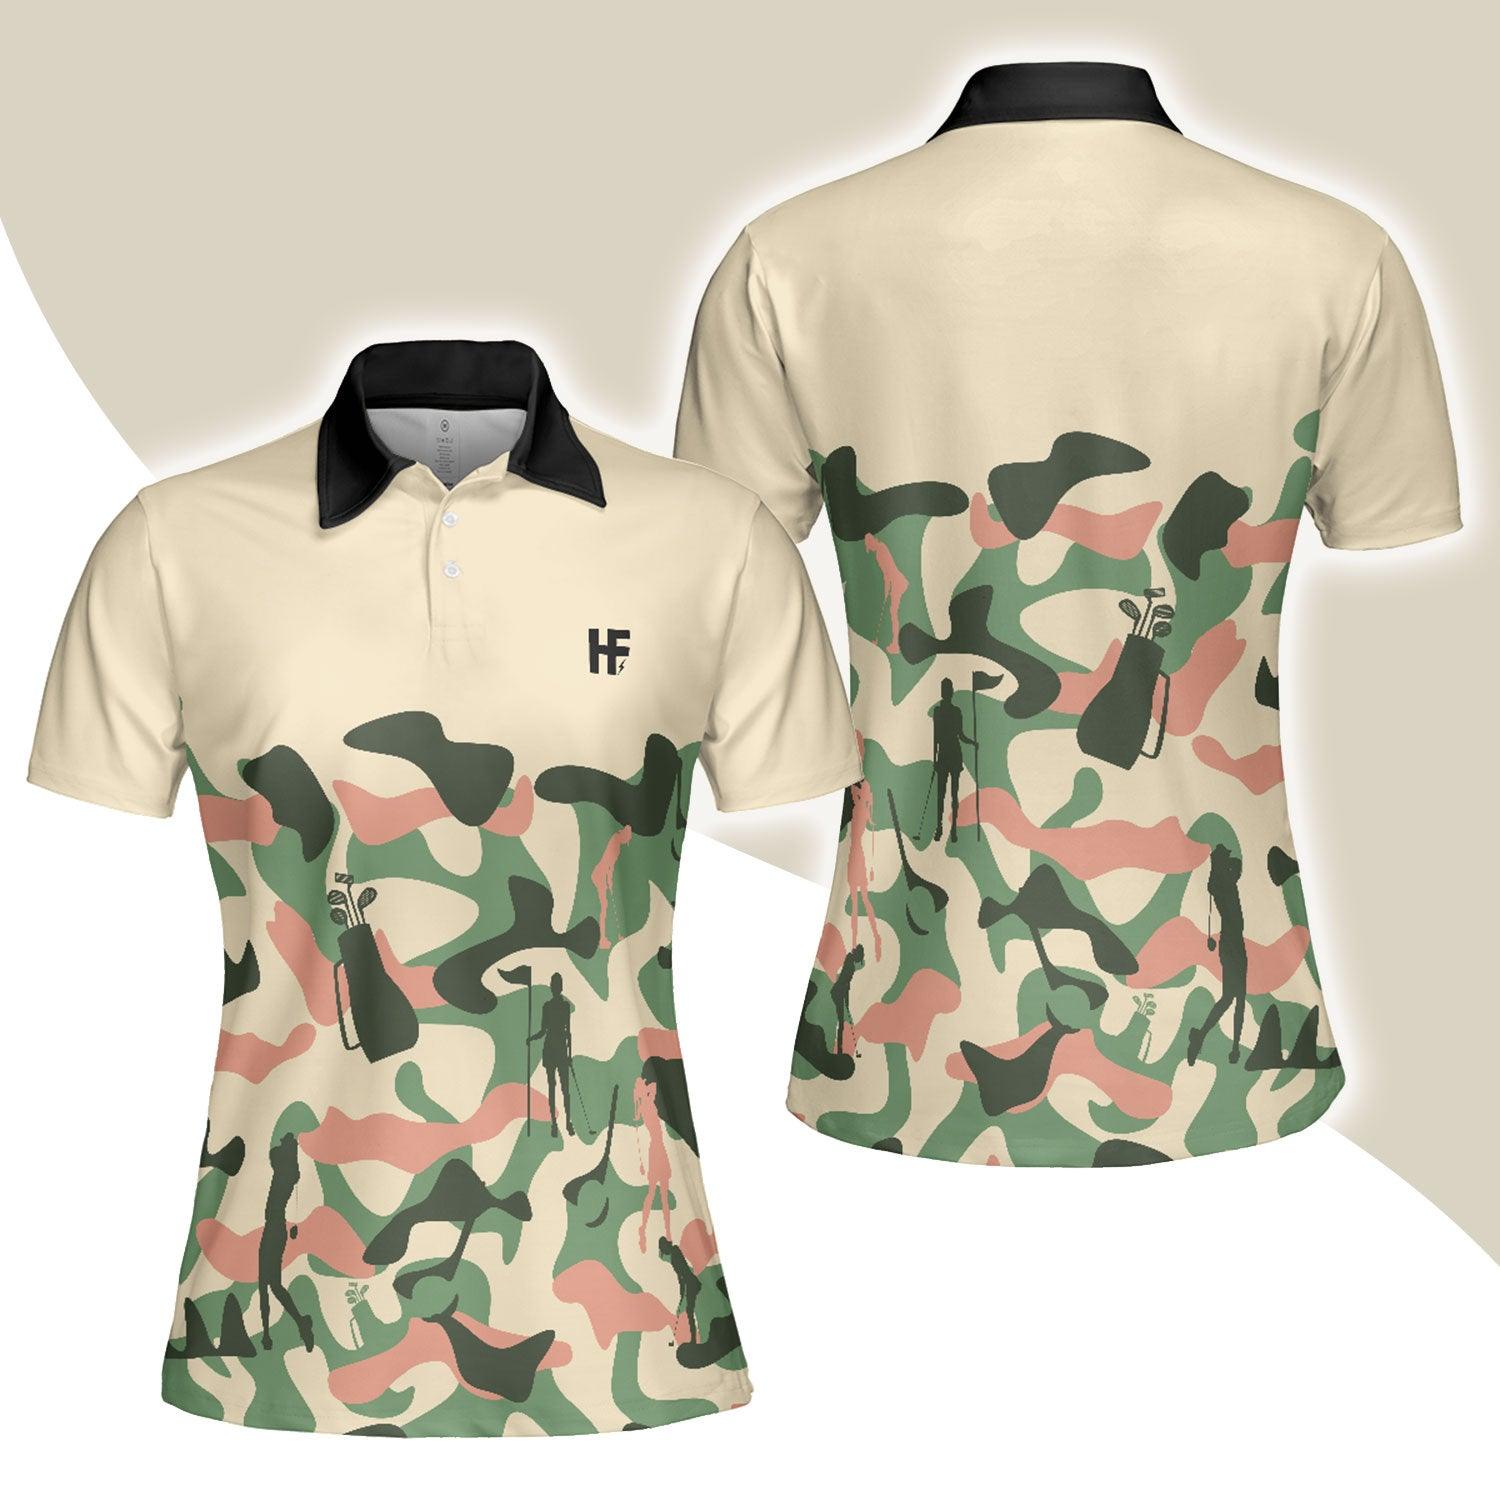 Golf Women Polo Shirt, Camouflage Texture Golf Set For Women, Camo Golf Shirt For Female - Perfect Gift For Ladies, Golfers, Golf Lovers - Amzanimalsgift